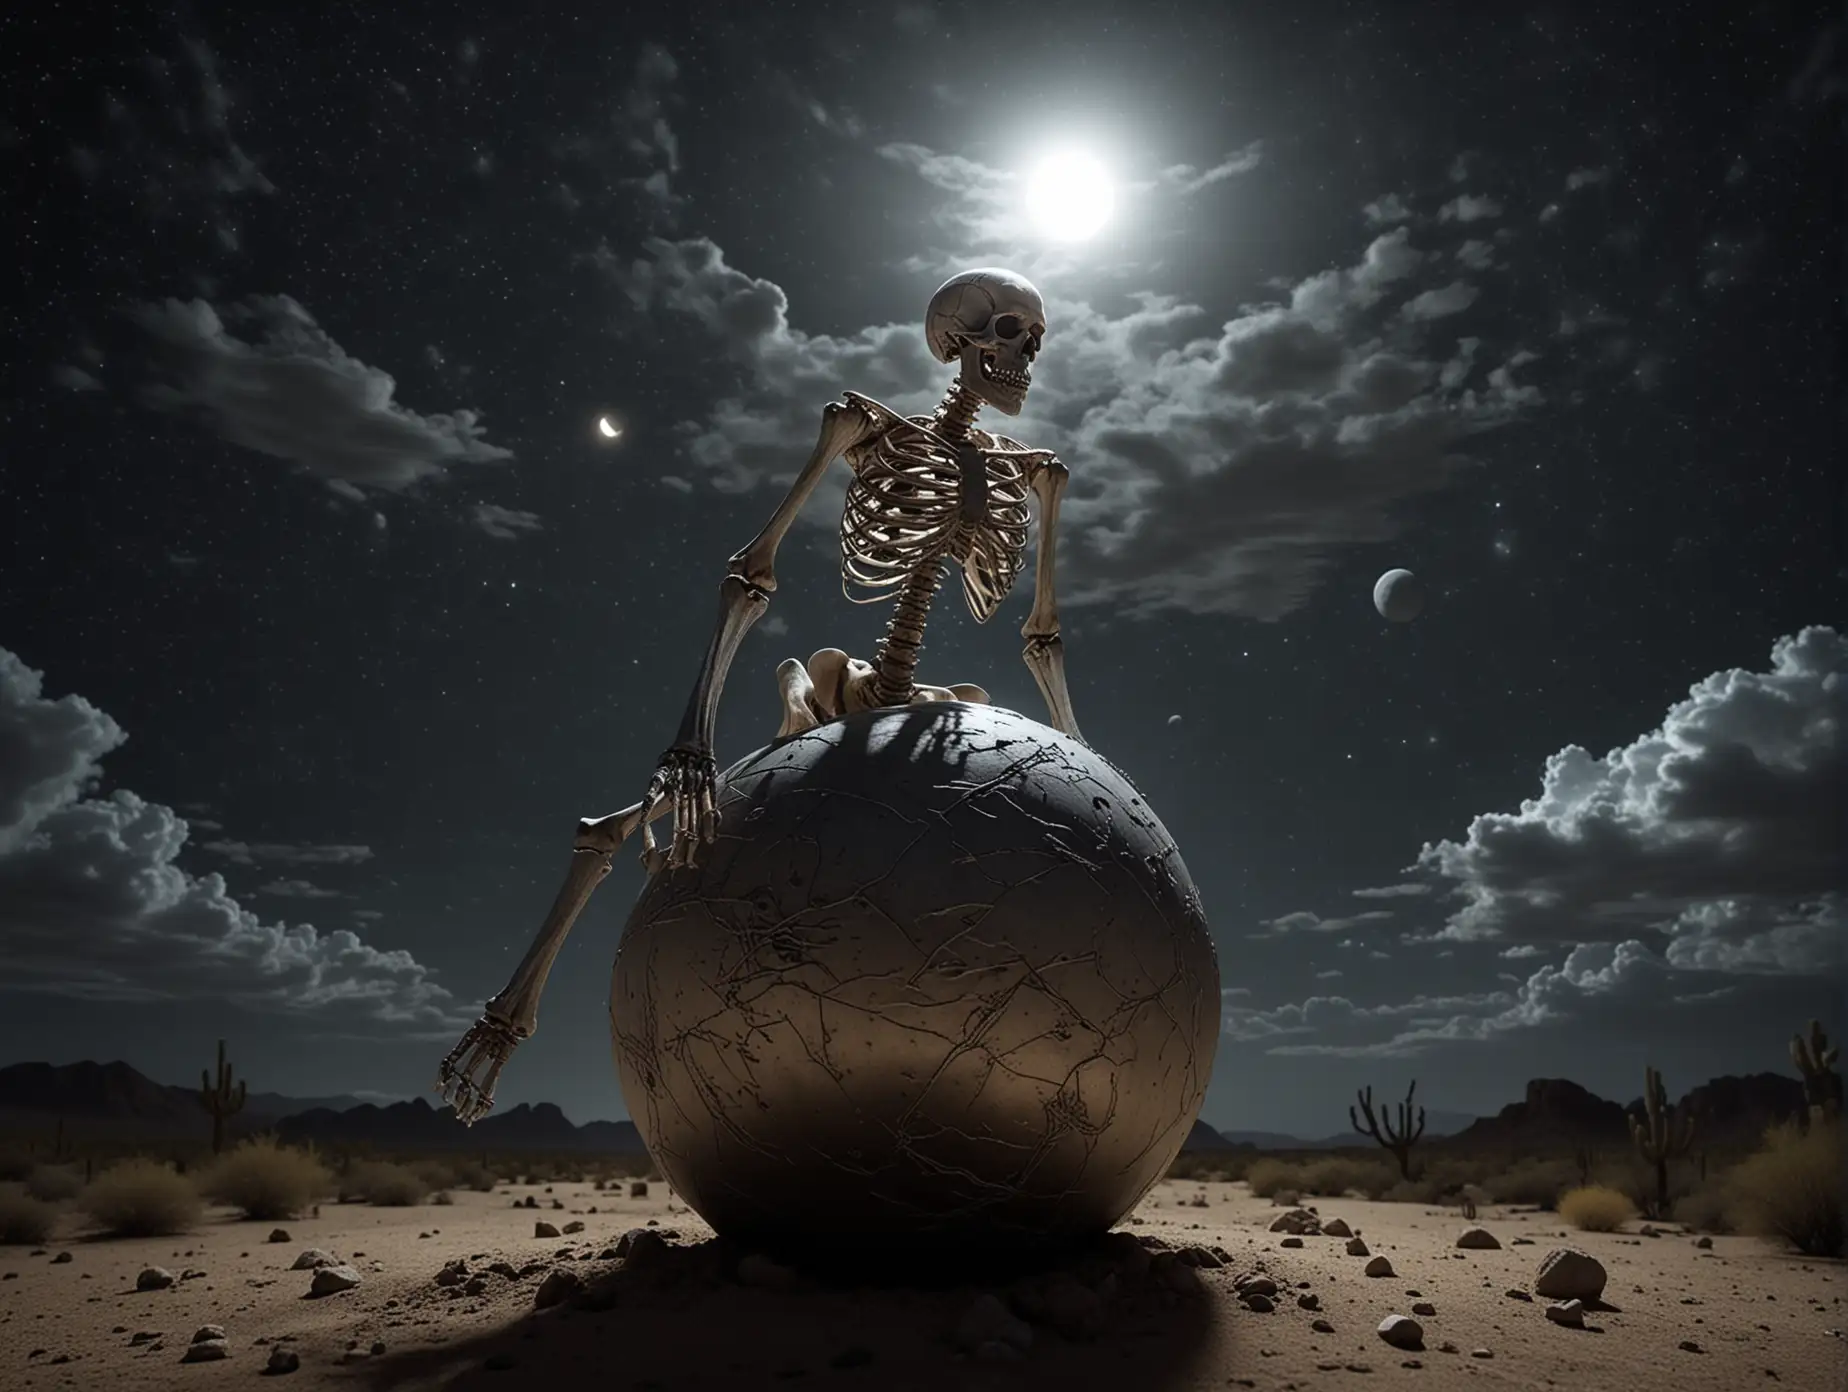 ULTRA REALISTIC high definition, one skeleton is flying high through the night skies of the Sonoran desert, sitting on its silver ball, full body, it flies among the clouds, riding its orb (ball) between its legs and sitting on it with it between its thighs (skeleton grips the ball with its thighs) (like a 50 cm  pregnancy ball) through the night sky racing through the clouds on a dark moonlit night with the orb tightly gripped between its legs, in cinematic lighting